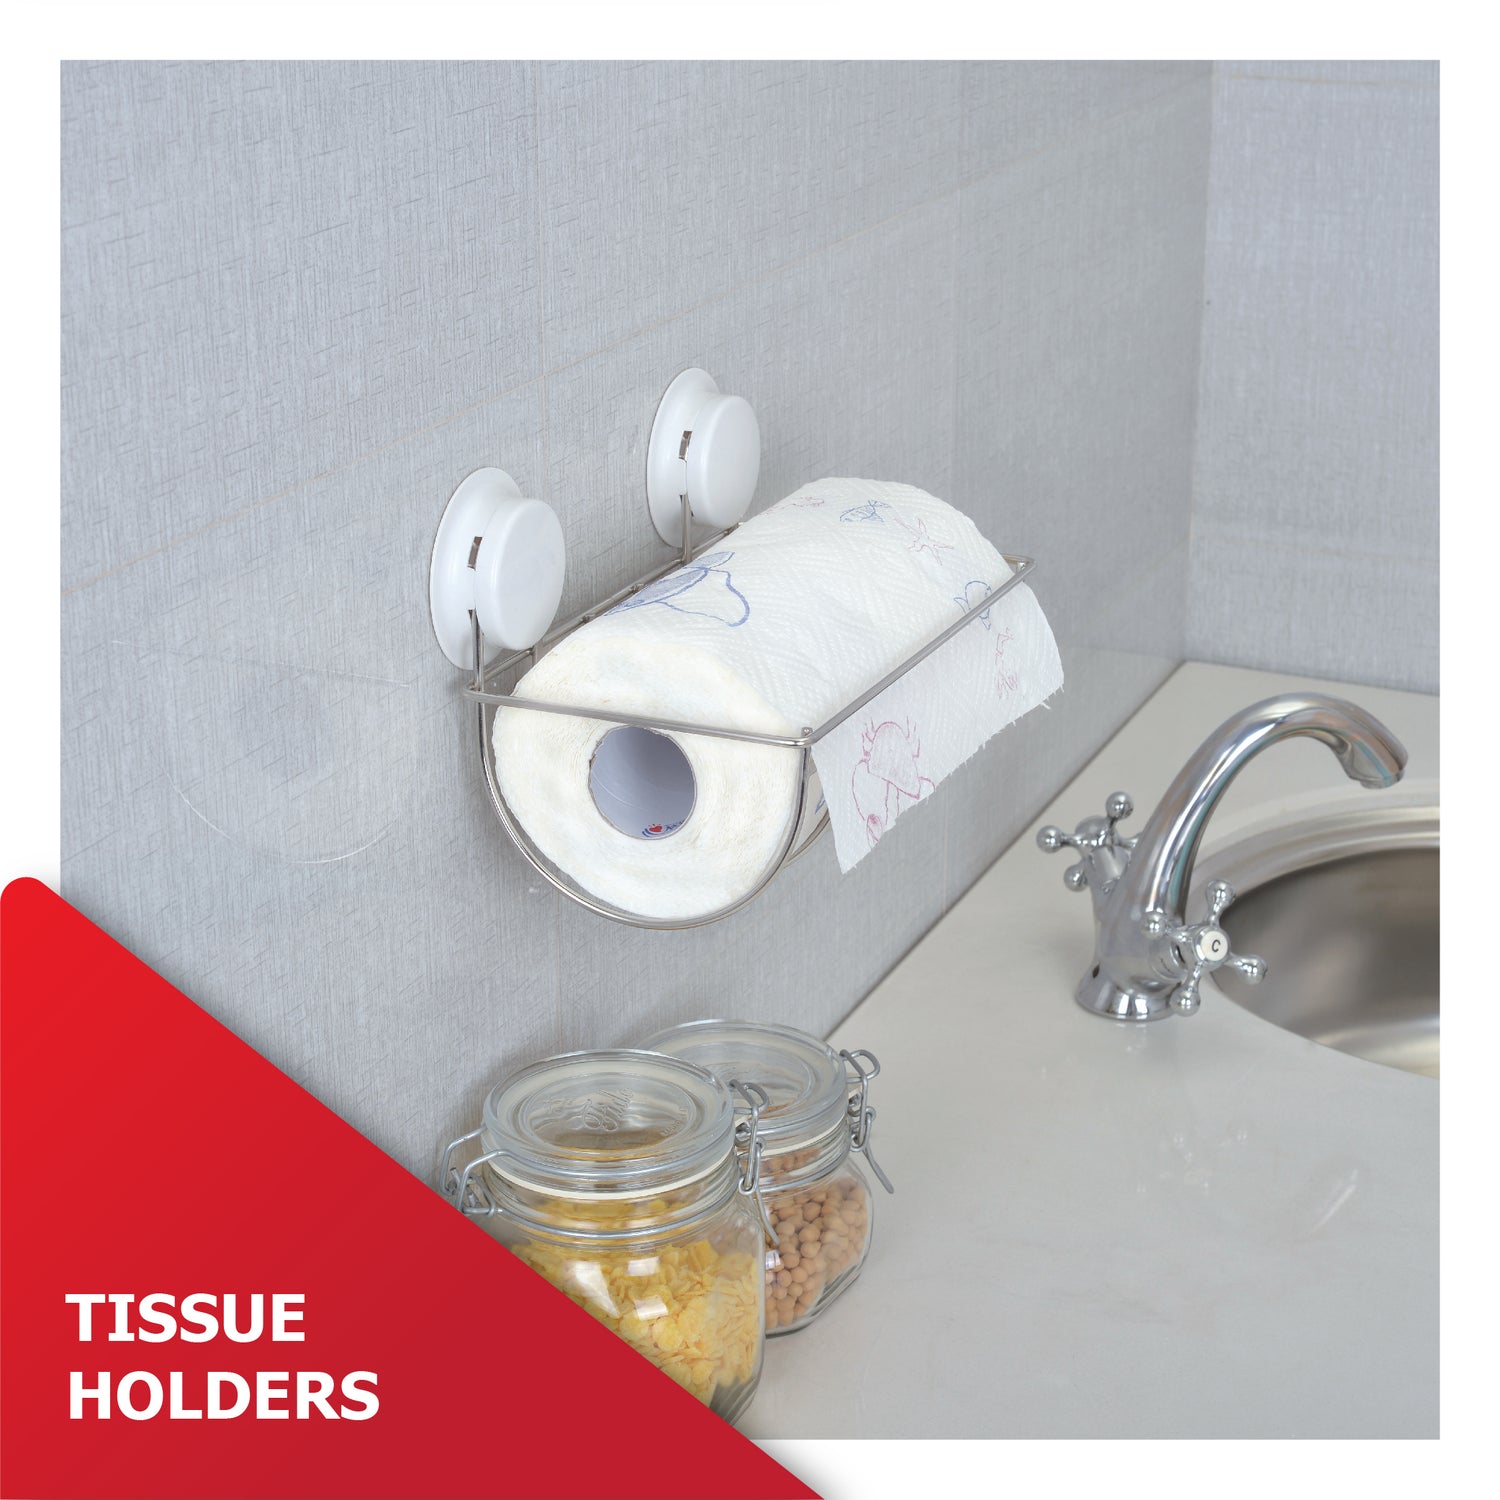 Toilet Paper Holders | Category